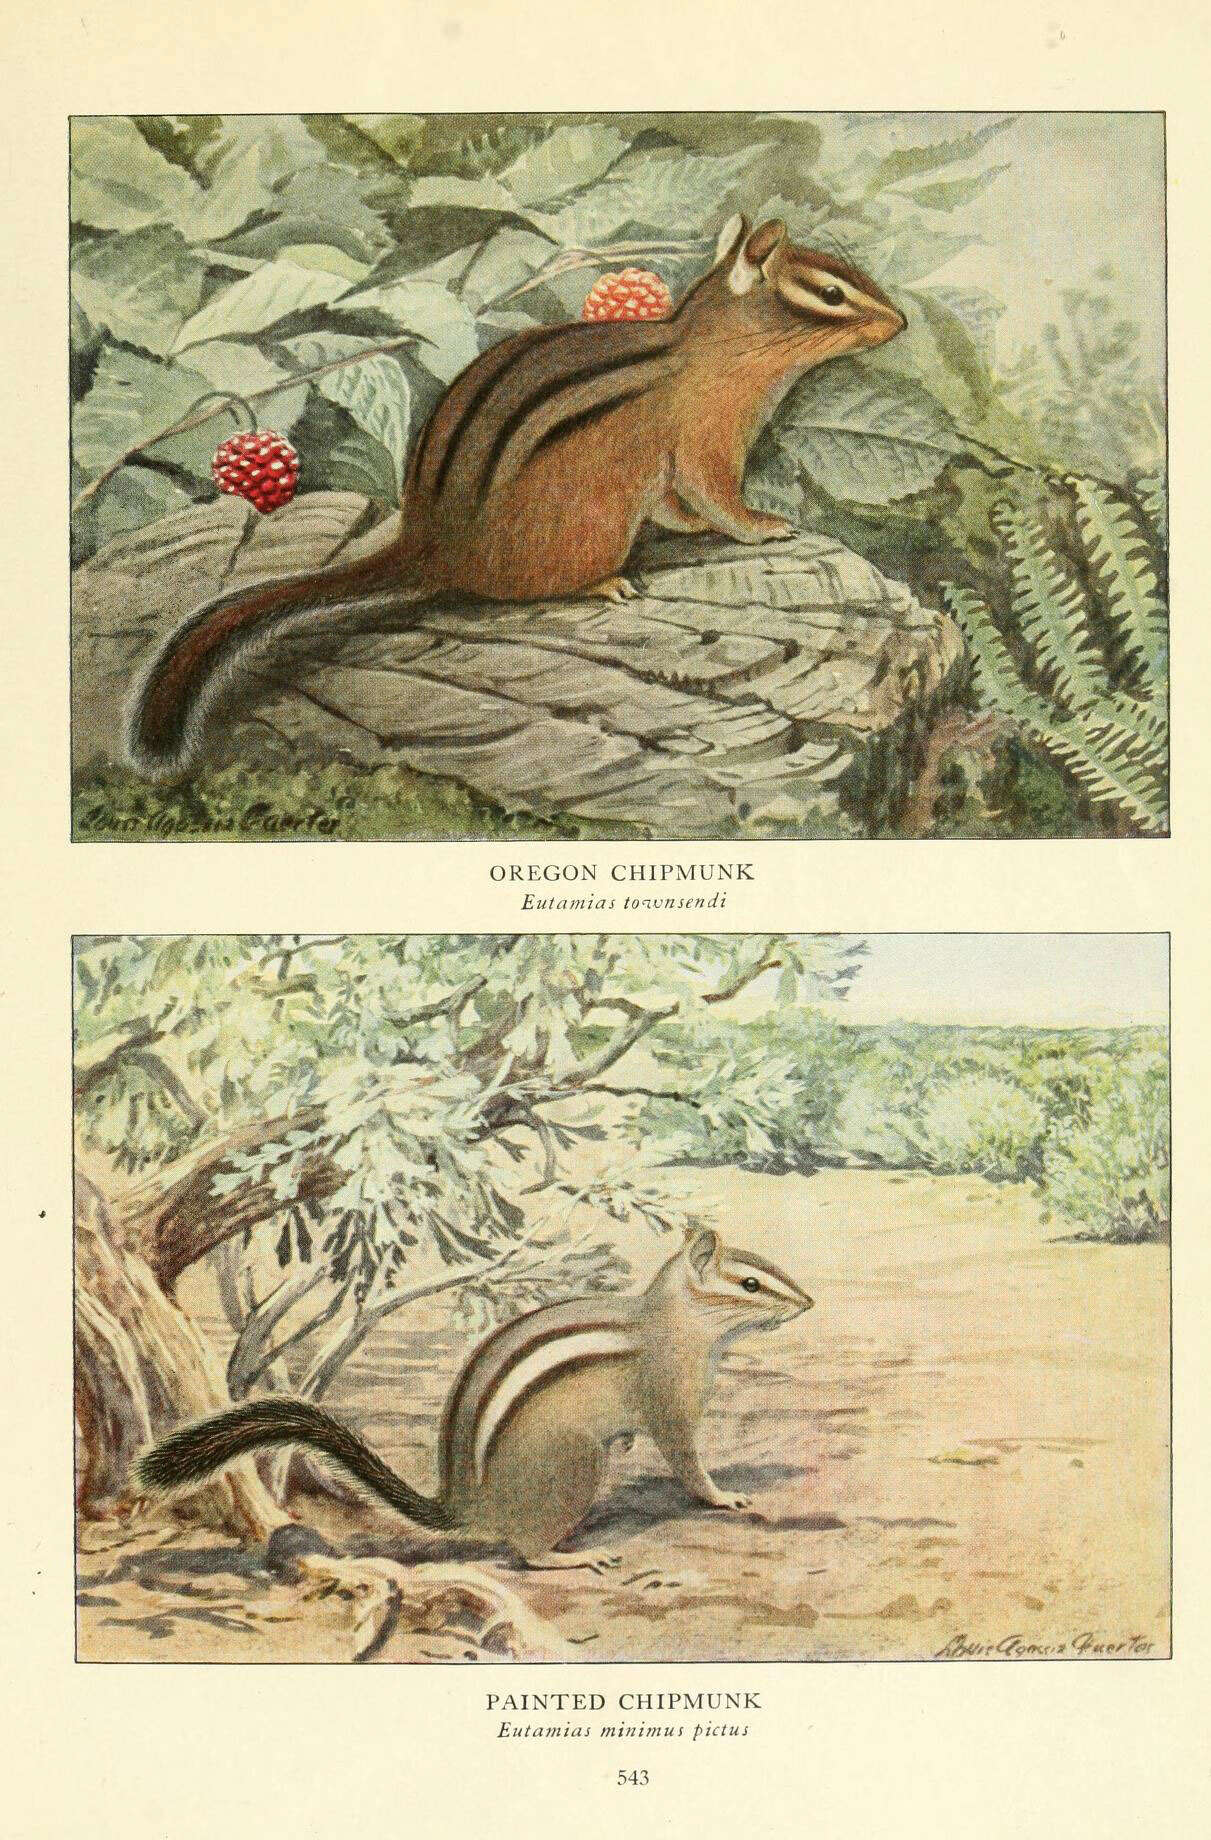 Image of Tamias subgen. Neotamias A. H. Howell 1929